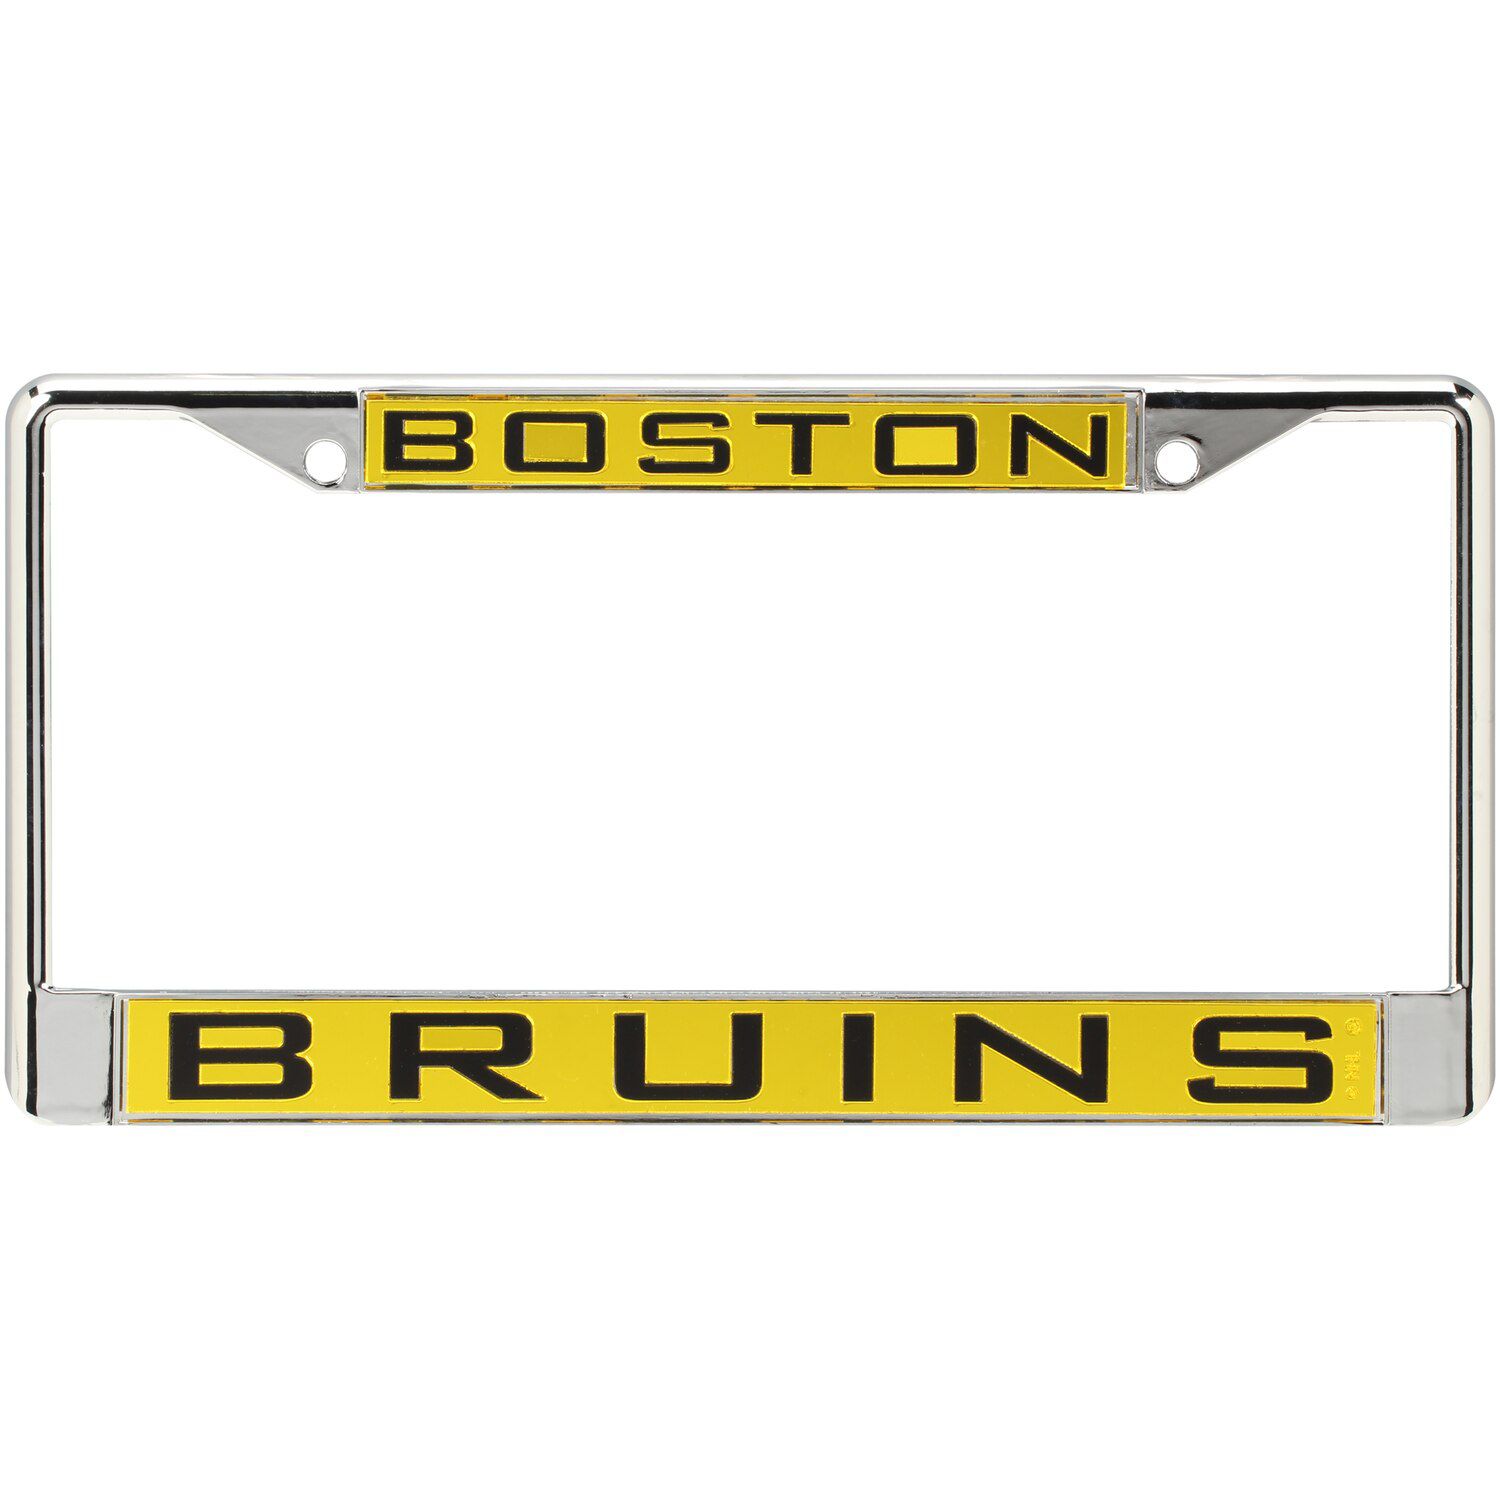 Image for Unbranded WinCraft Boston Bruins Laser Inlaid Metal License Plate Frame at Kohl's.